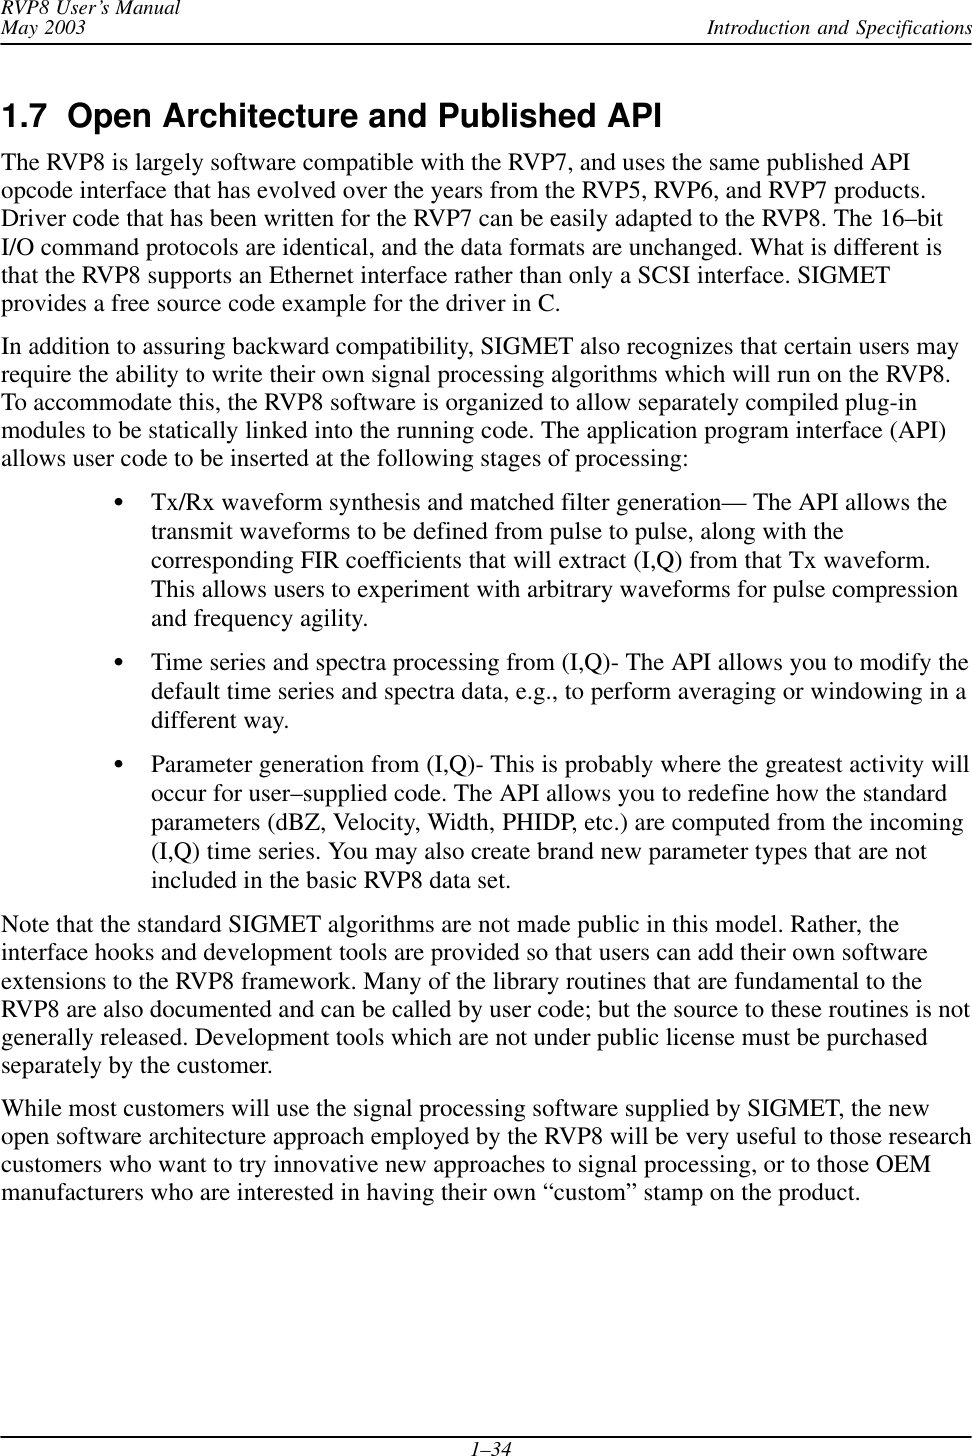 Introduction and SpecificationsRVP8 User’s ManualMay 20031–341.7  Open Architecture and Published APIThe RVP8 is largely software compatible with the RVP7, and uses the same published APIopcode interface that has evolved over the years from the RVP5, RVP6, and RVP7 products.Driver code that has been written for the RVP7 can be easily adapted to the RVP8. The 16–bitI/O command protocols are identical, and the data formats are unchanged. What is different isthat the RVP8 supports an Ethernet interface rather than only a SCSI interface. SIGMETprovides a free source code example for the driver in C.In addition to assuring backward compatibility, SIGMET also recognizes that certain users mayrequire the ability to write their own signal processing algorithms which will run on the RVP8.To accommodate this, the RVP8 software is organized to allow separately compiled plug-inmodules to be statically linked into the running code. The application program interface (API)allows user code to be inserted at the following stages of processing:Tx/Rx waveform synthesis and matched filter generation— The API allows thetransmit waveforms to be defined from pulse to pulse, along with thecorresponding FIR coefficients that will extract (I,Q) from that Tx waveform.This allows users to experiment with arbitrary waveforms for pulse compressionand frequency agility.Time series and spectra processing from (I,Q)- The API allows you to modify thedefault time series and spectra data, e.g., to perform averaging or windowing in adifferent way.Parameter generation from (I,Q)- This is probably where the greatest activity willoccur for user–supplied code. The API allows you to redefine how the standardparameters (dBZ, Velocity, Width, PHIDP, etc.) are computed from the incoming(I,Q) time series. You may also create brand new parameter types that are notincluded in the basic RVP8 data set.Note that the standard SIGMET algorithms are not made public in this model. Rather, theinterface hooks and development tools are provided so that users can add their own softwareextensions to the RVP8 framework. Many of the library routines that are fundamental to theRVP8 are also documented and can be called by user code; but the source to these routines is notgenerally released. Development tools which are not under public license must be purchasedseparately by the customer.While most customers will use the signal processing software supplied by SIGMET, the newopen software architecture approach employed by the RVP8 will be very useful to those researchcustomers who want to try innovative new approaches to signal processing, or to those OEMmanufacturers who are interested in having their own “custom” stamp on the product.